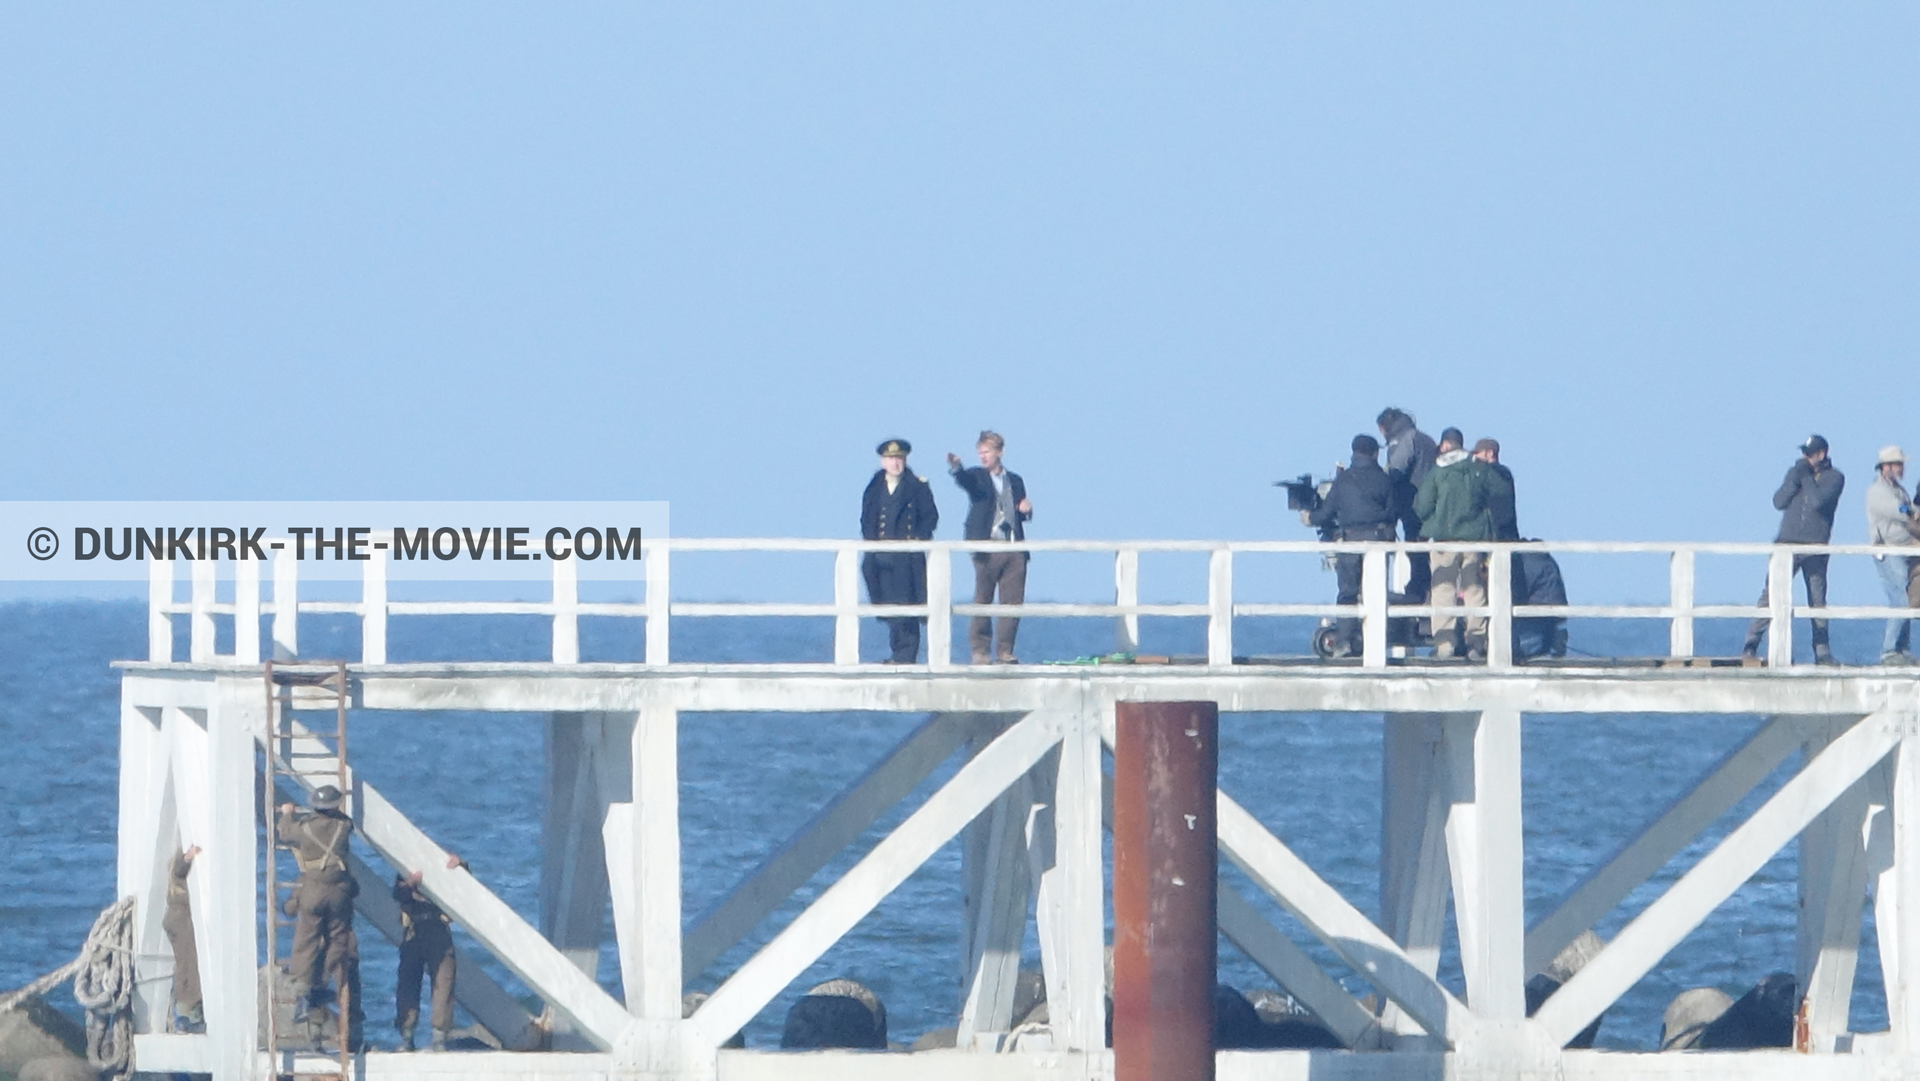 Picture with blue sky, Hoyte van Hoytema, EST pier, Kenneth Branagh, calm sea, Christopher Nolan, technical team,  from behind the scene of the Dunkirk movie by Nolan